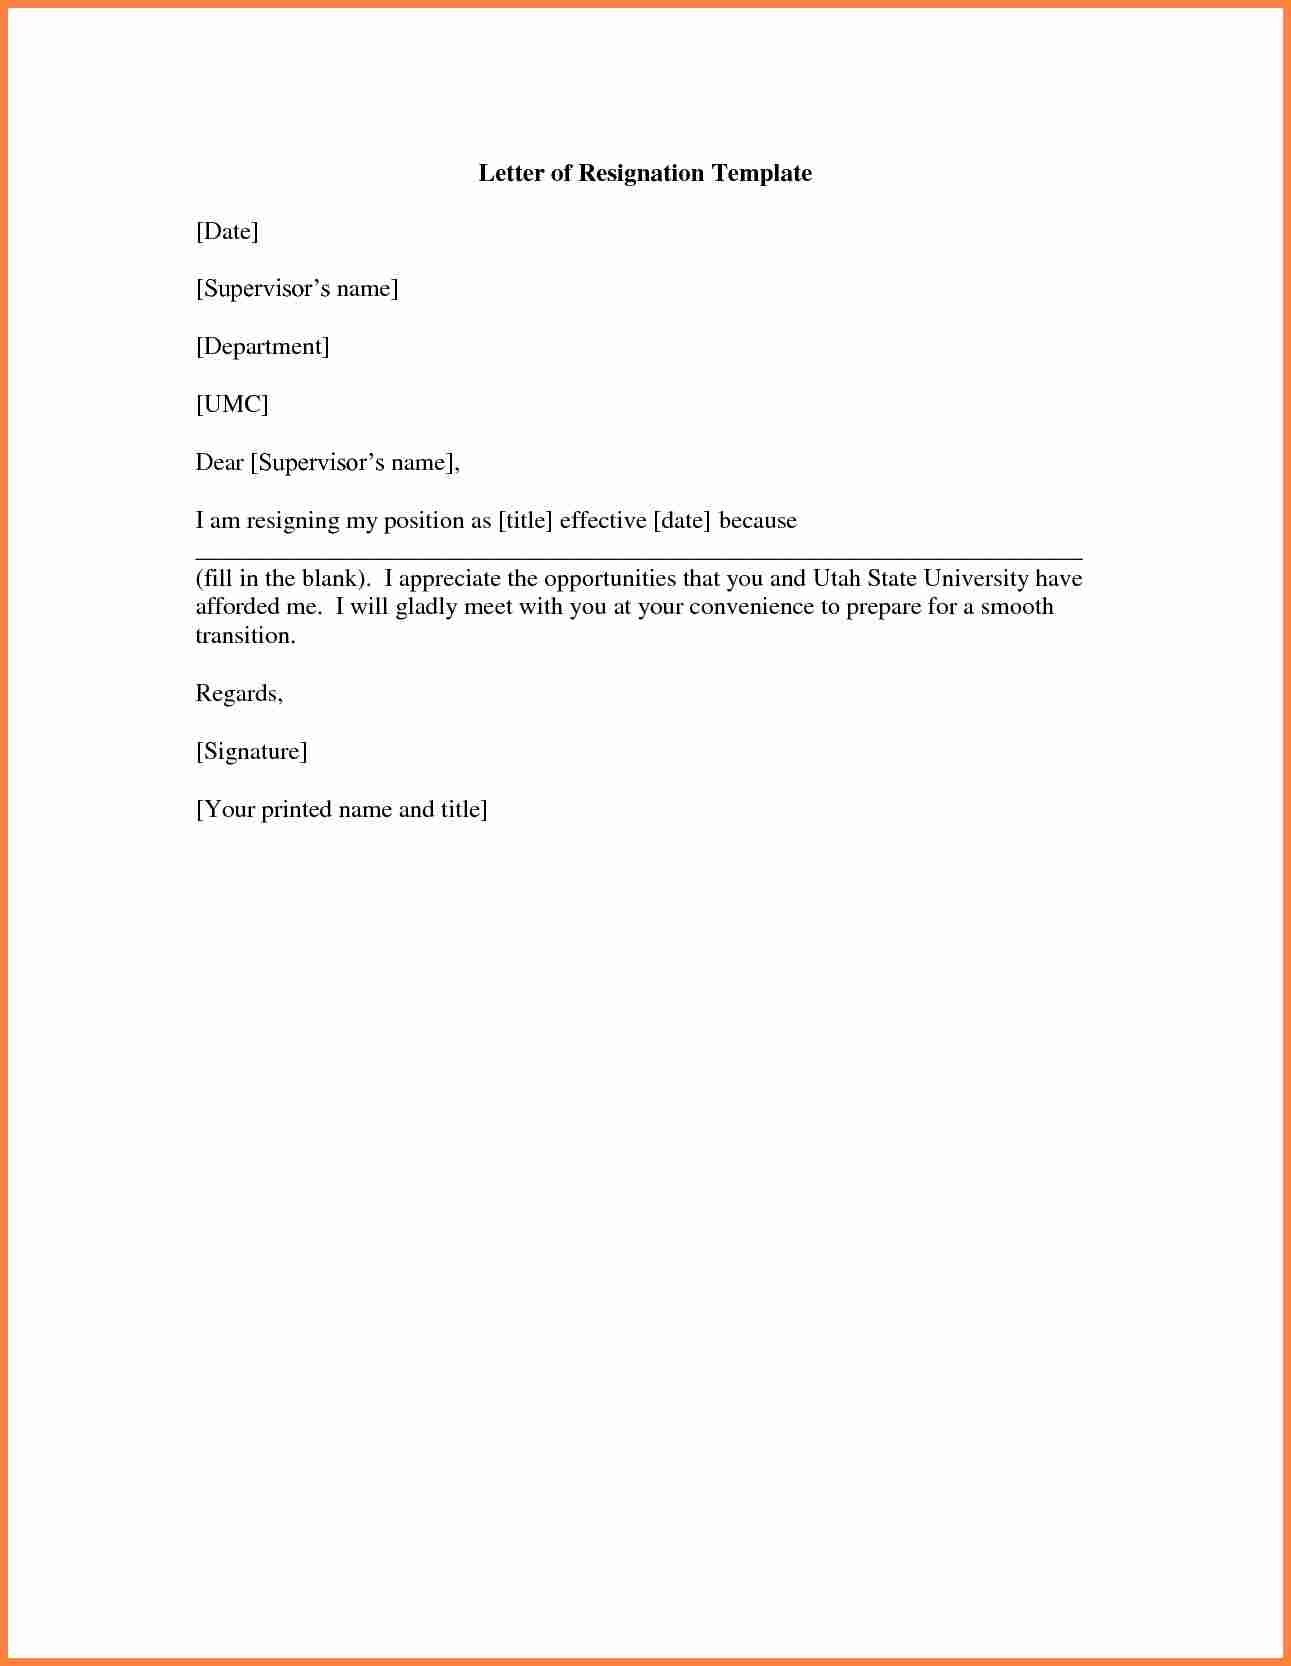 Letter Of Resignation Template  Format Of Resignation Letter With Notice Period New Template For 30